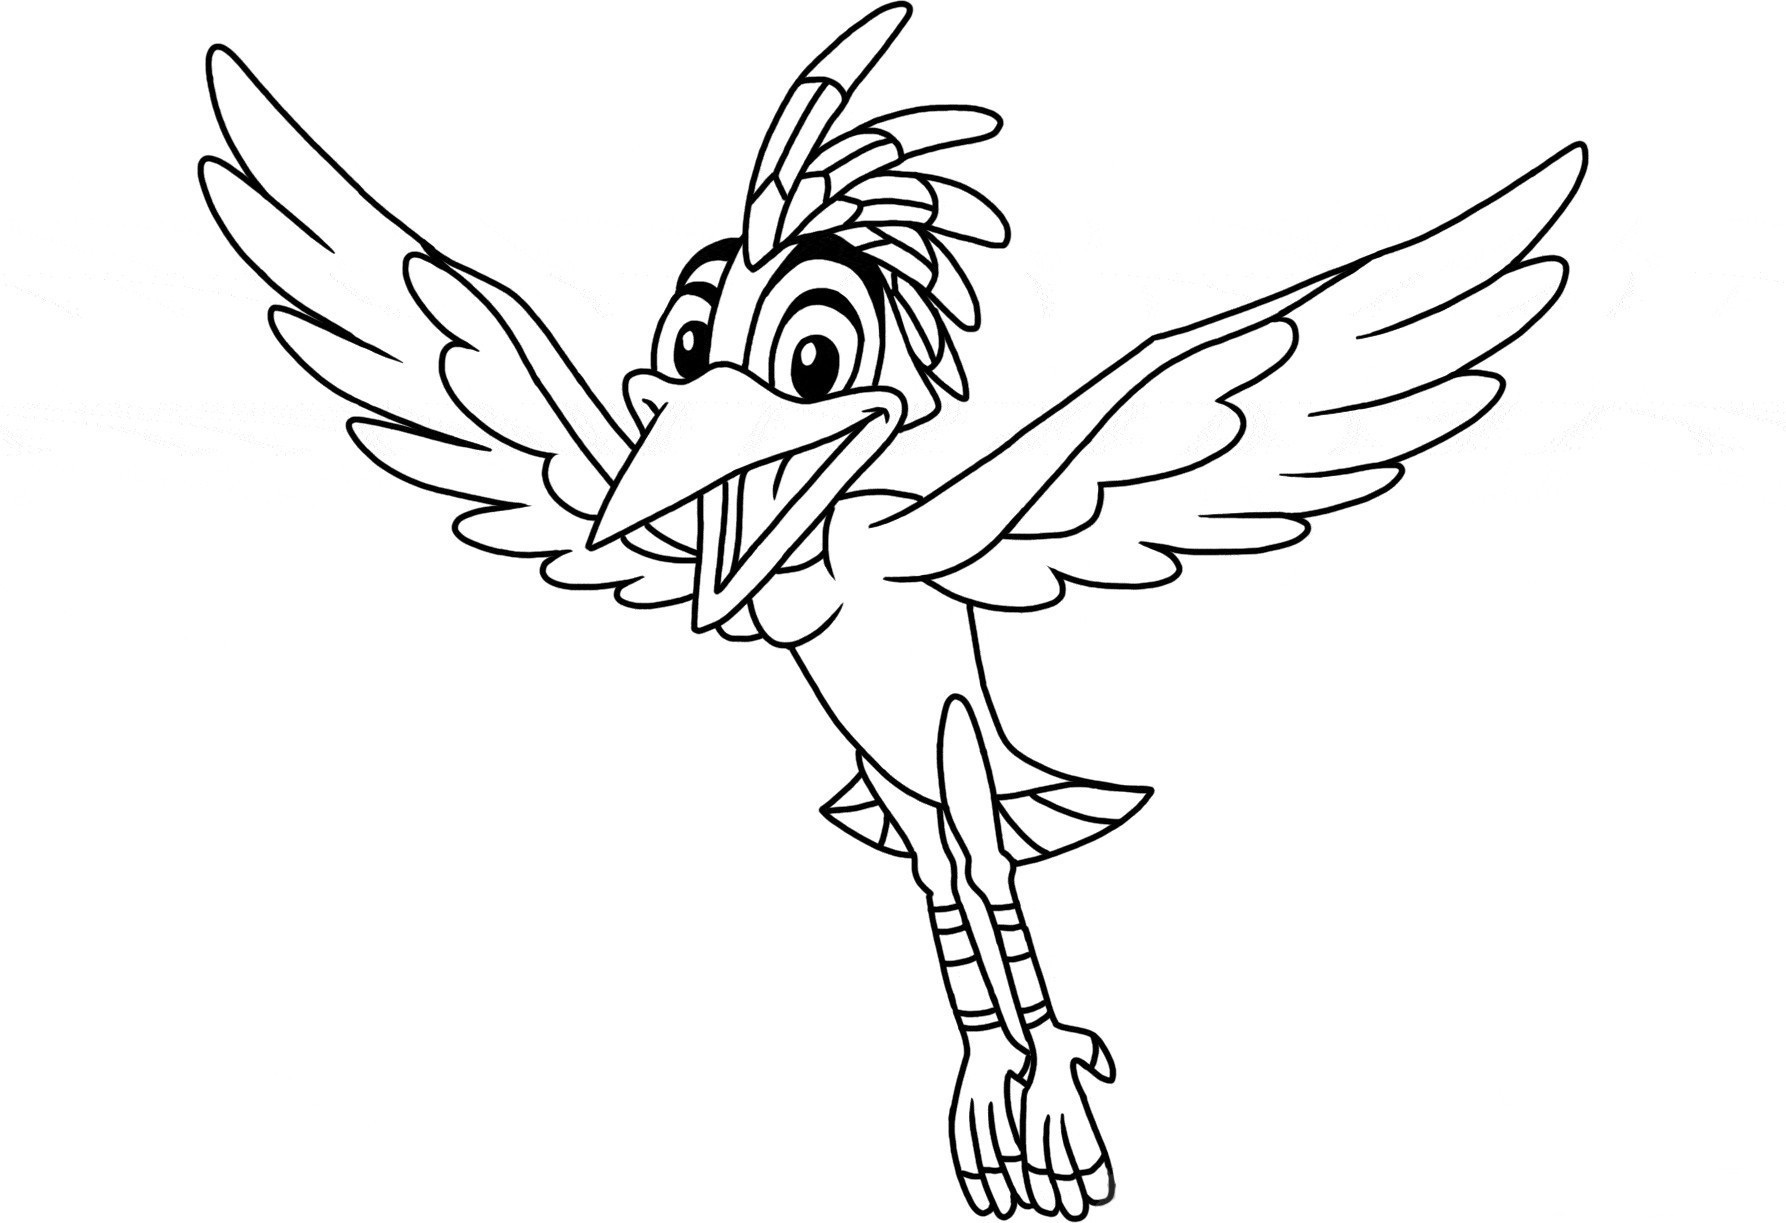  Coloring  Pages  Disney Lion  Guard  Coloring  Pages  For Kids 